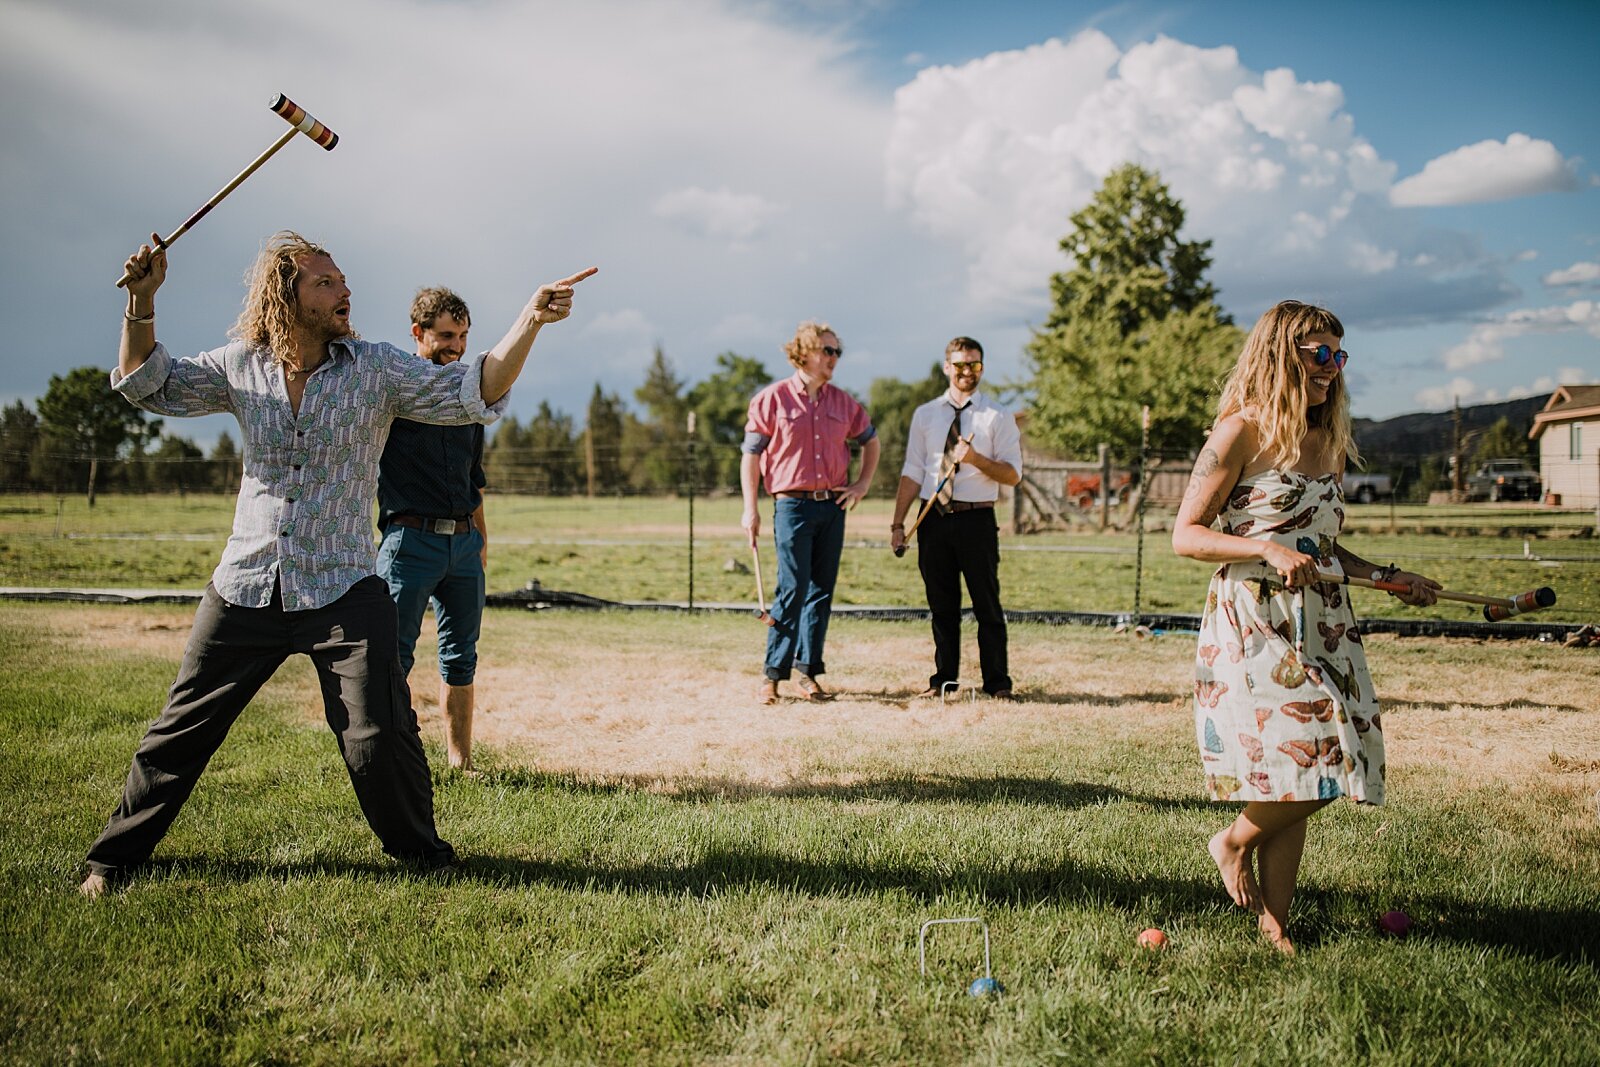 guests playing yard games at backyard wedding, mt hood elopement, mt hood national forest, smith rock state park wedding, smith rock state park hiking elopement, terrebonne oregon backyard wedding